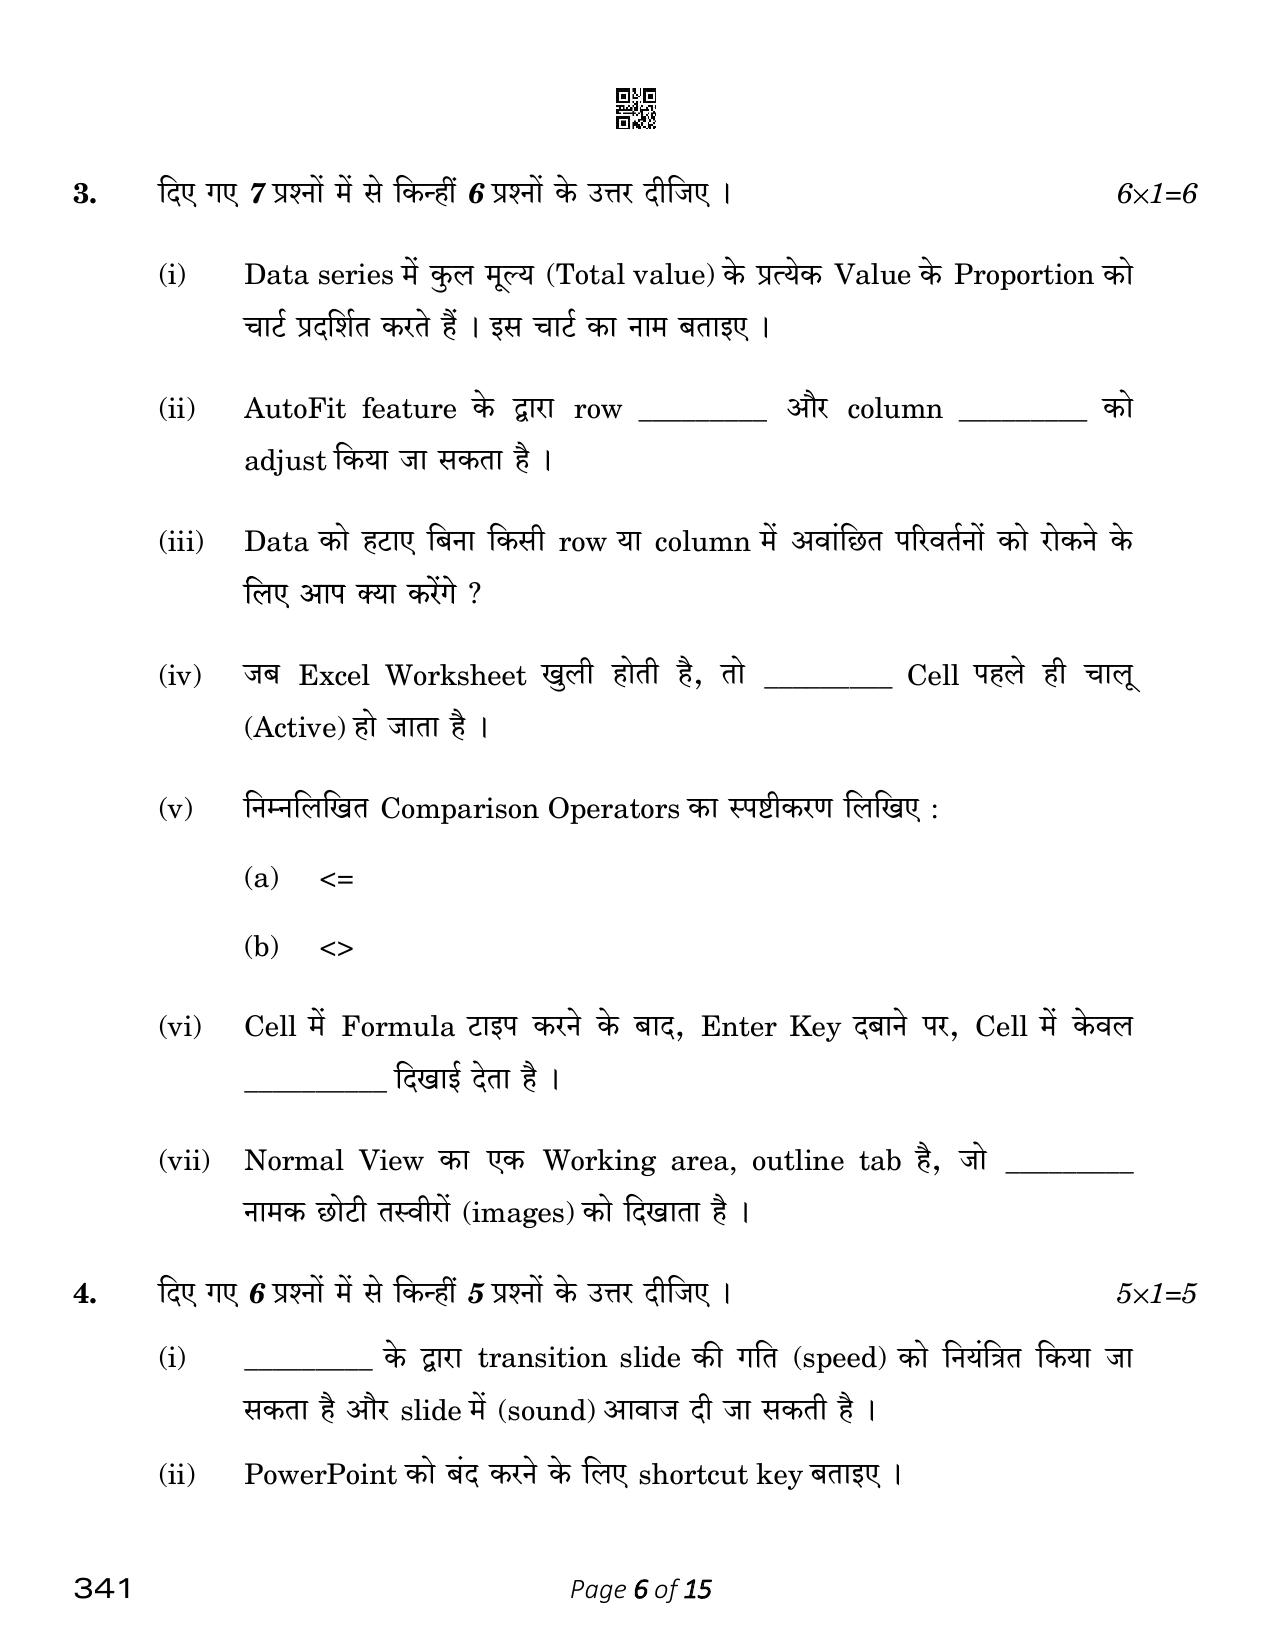 CBSE Class 12 Typography & Computer Applications (Compartment) 2023 Question Paper - Page 6